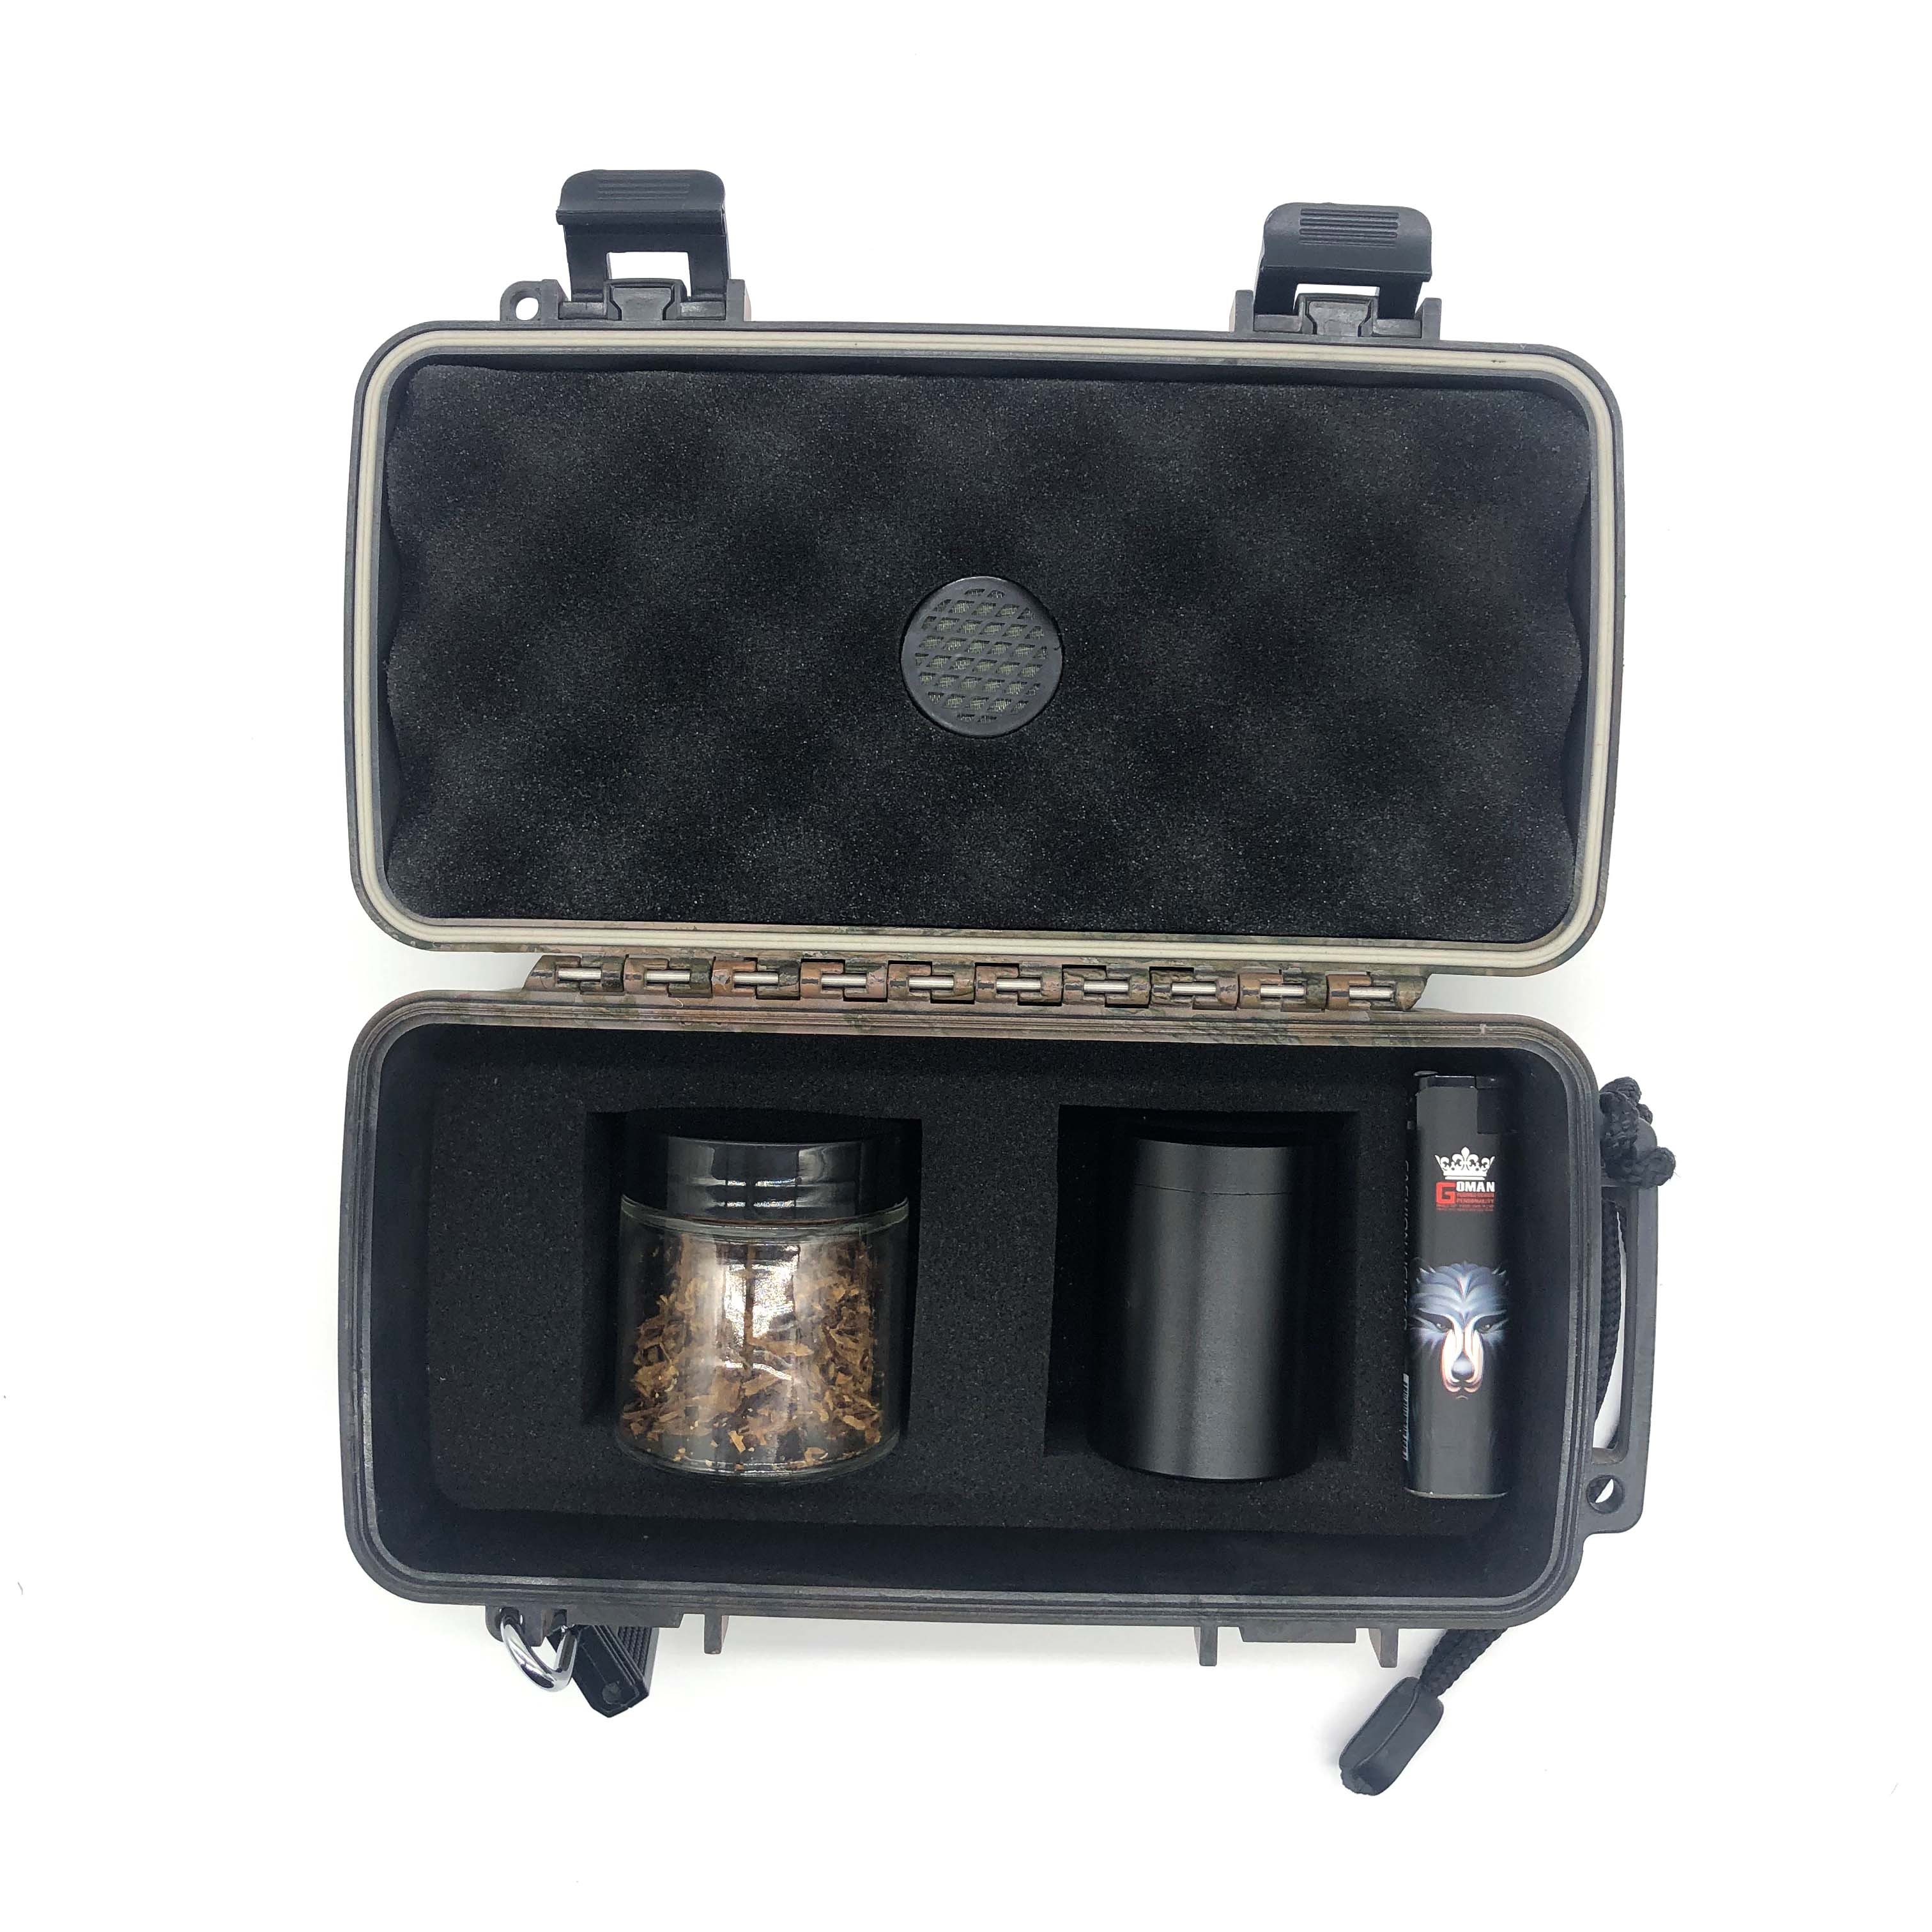 [BP-7002] China Stash Box Manufacturer Custom Hard Plastic Smell Proof Weed Smoking Kit Tobacco Smoking Accessories Set with Rolling Tray Grinder